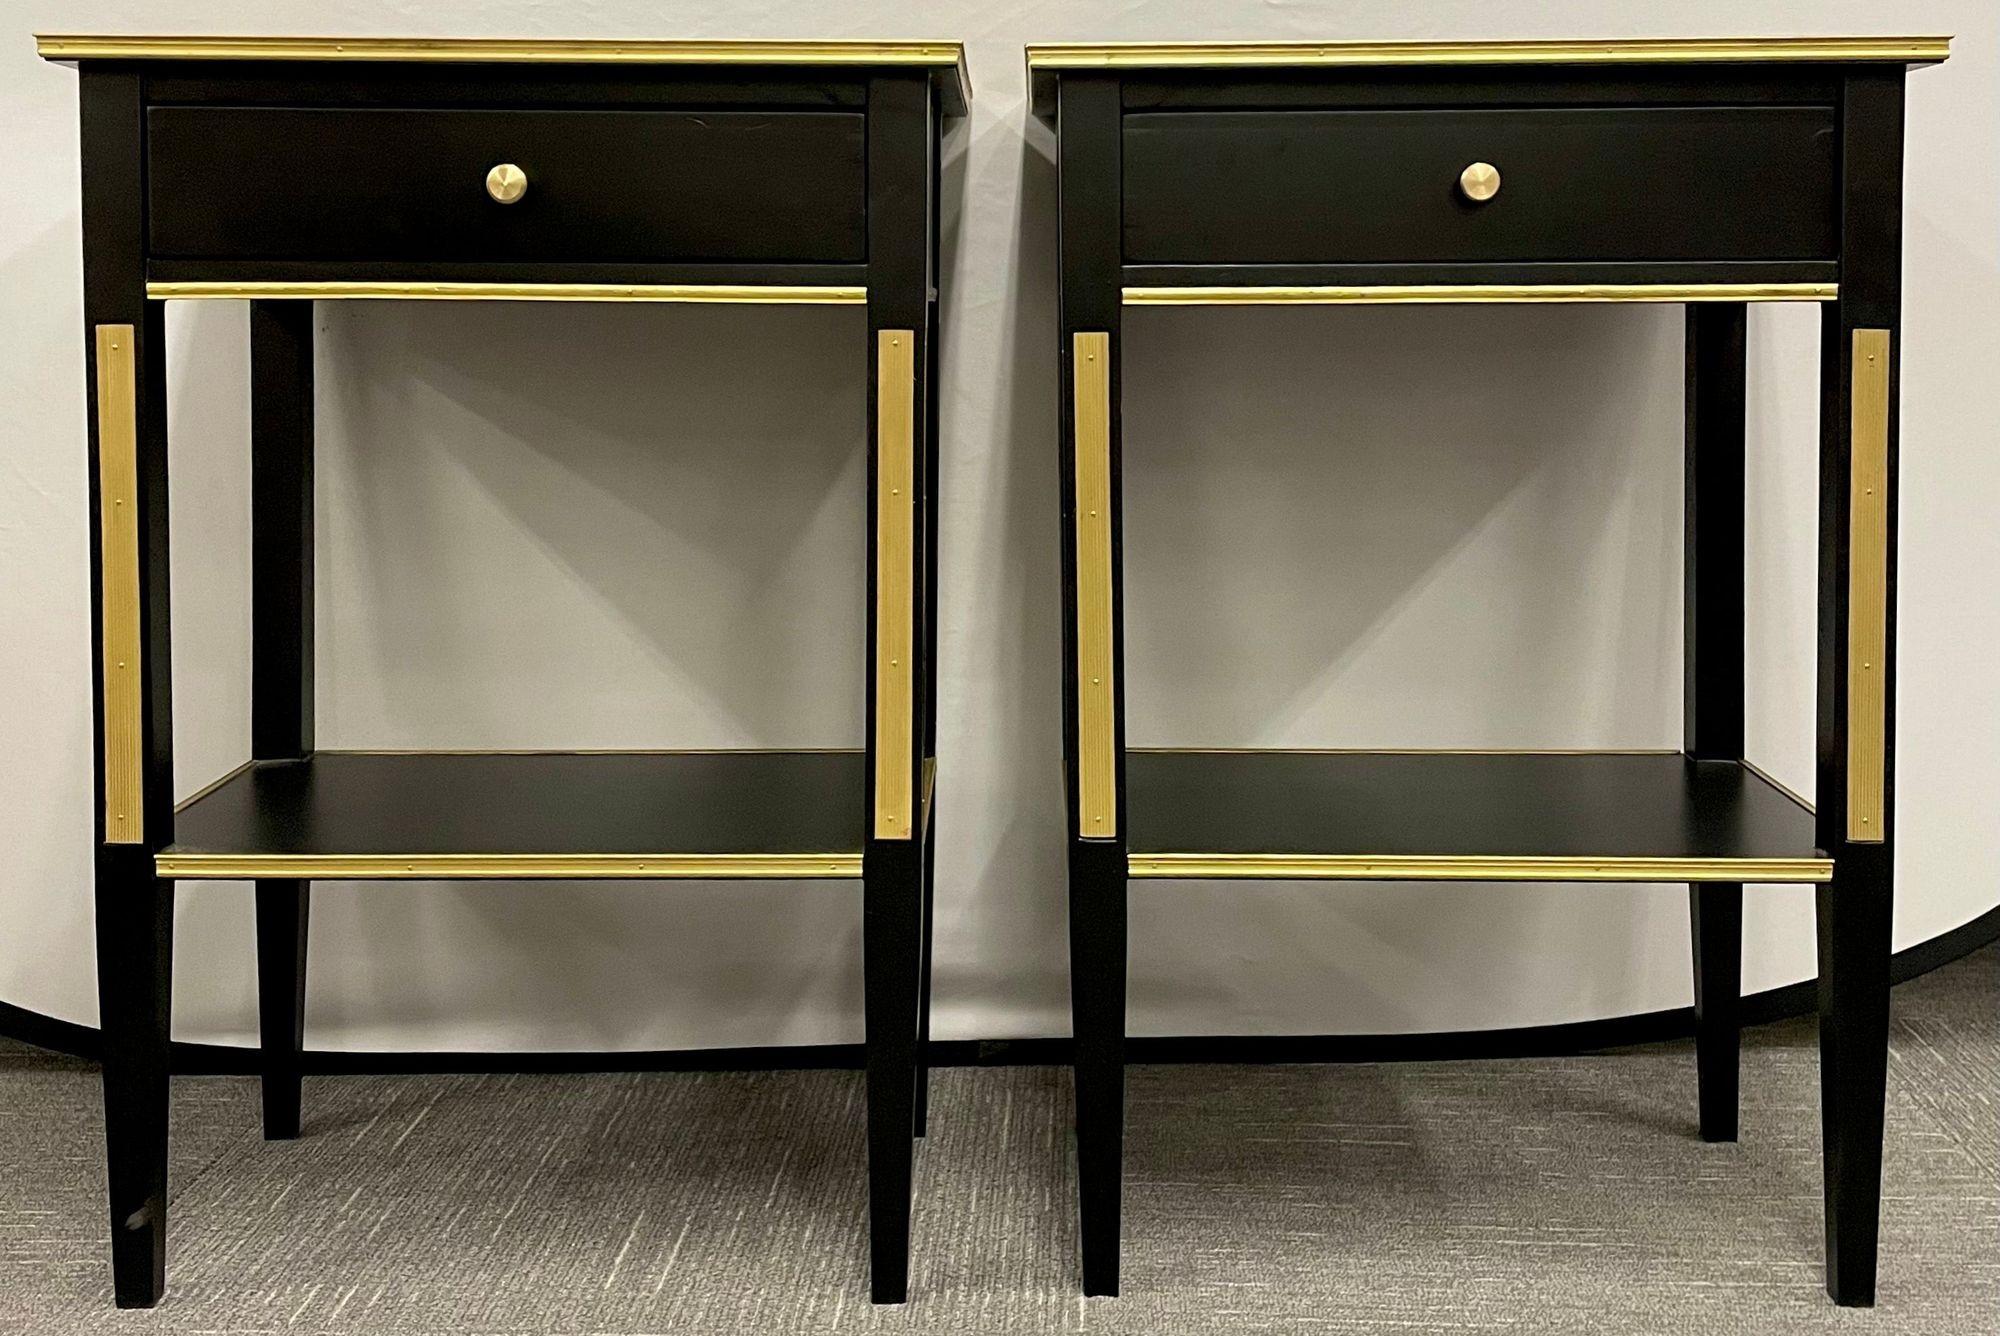 A pair of one drawer Russian neoclassical style stands or end tables. These sleek and stylish one drawer Hollywood Regency style bedside stands or end tables are simply as sweet as anyone could ask for. The case has been nicely polished in an ebony